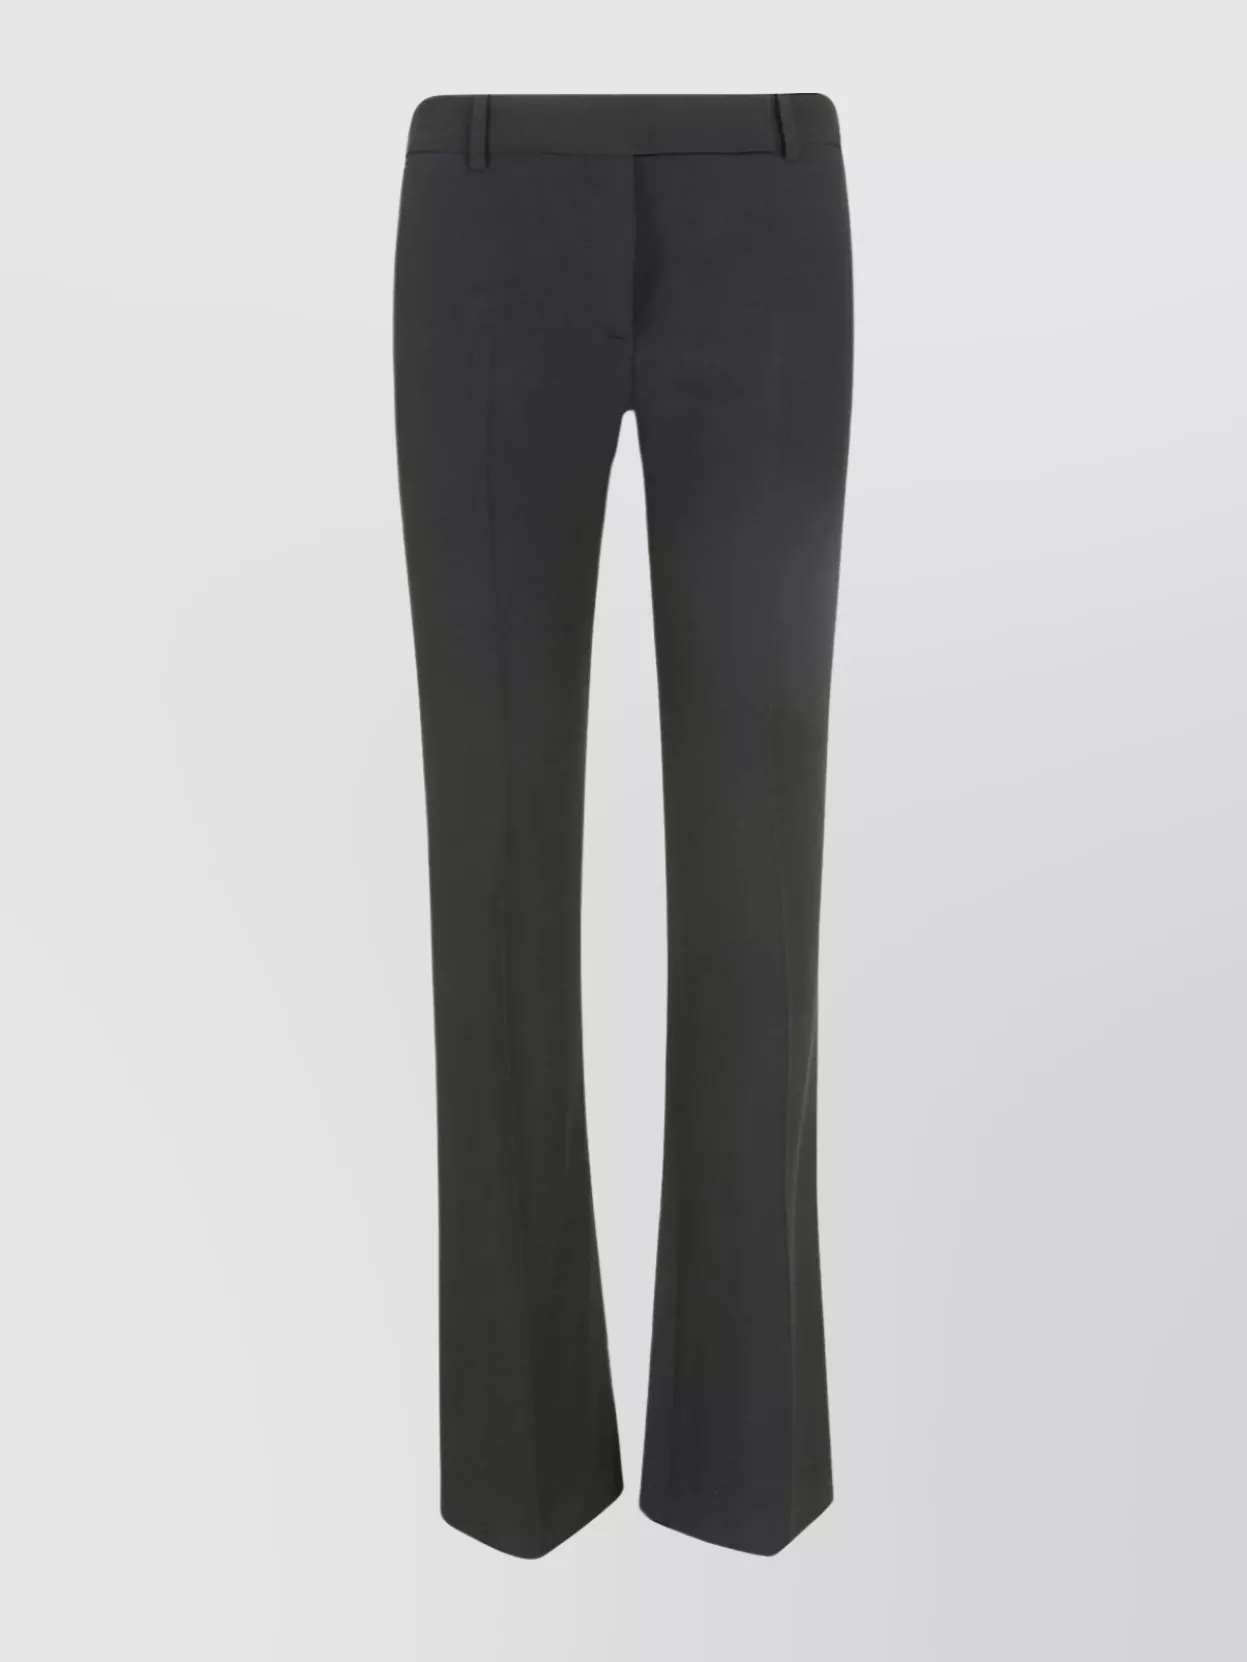 Shop Alexander Mcqueen Slim Bootcut Trousers Featuring Front Crease